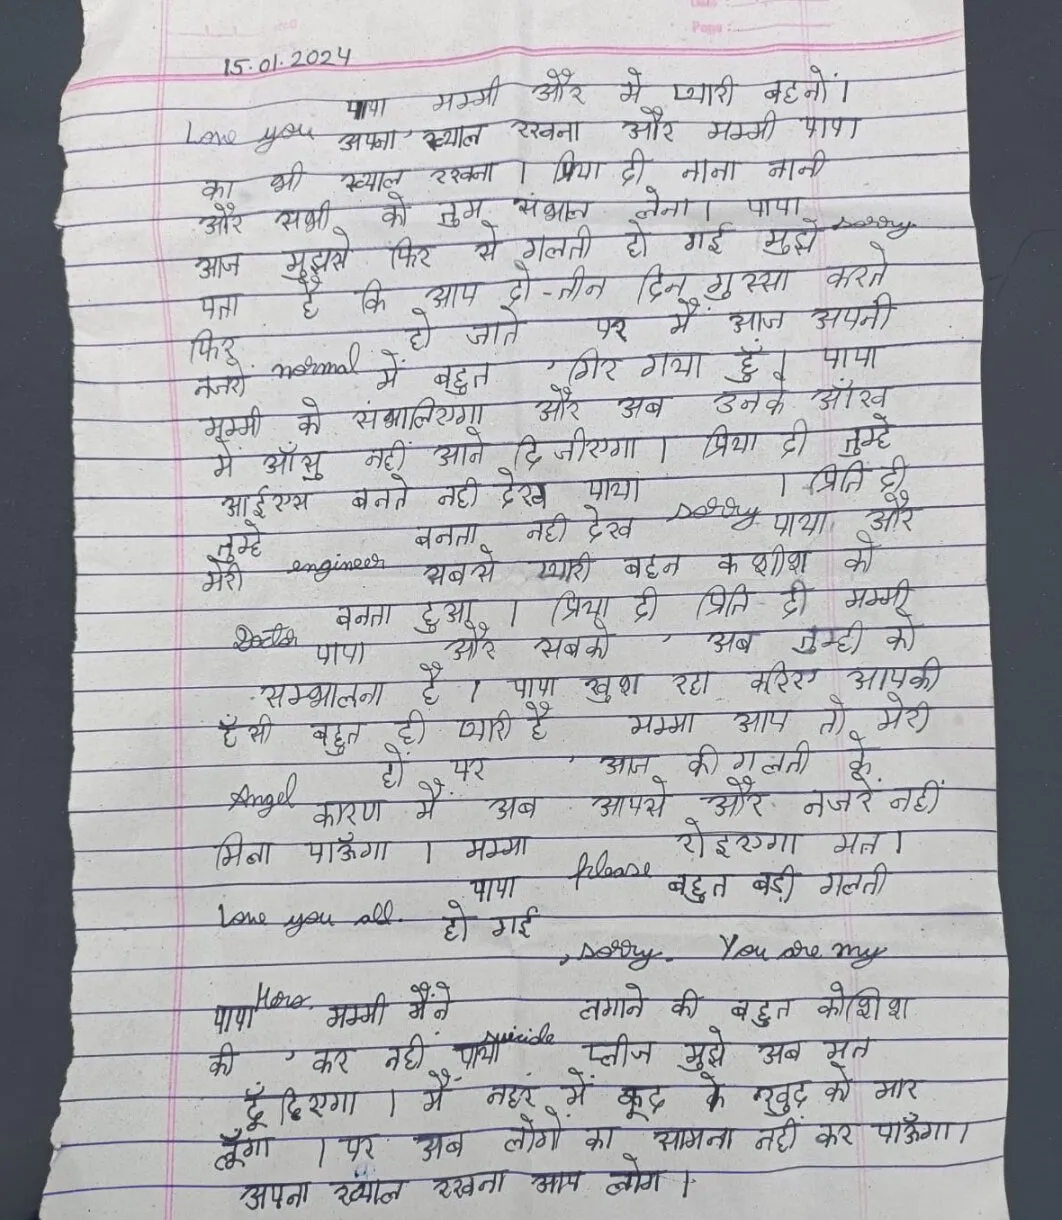 kanpur_student_suicide_note